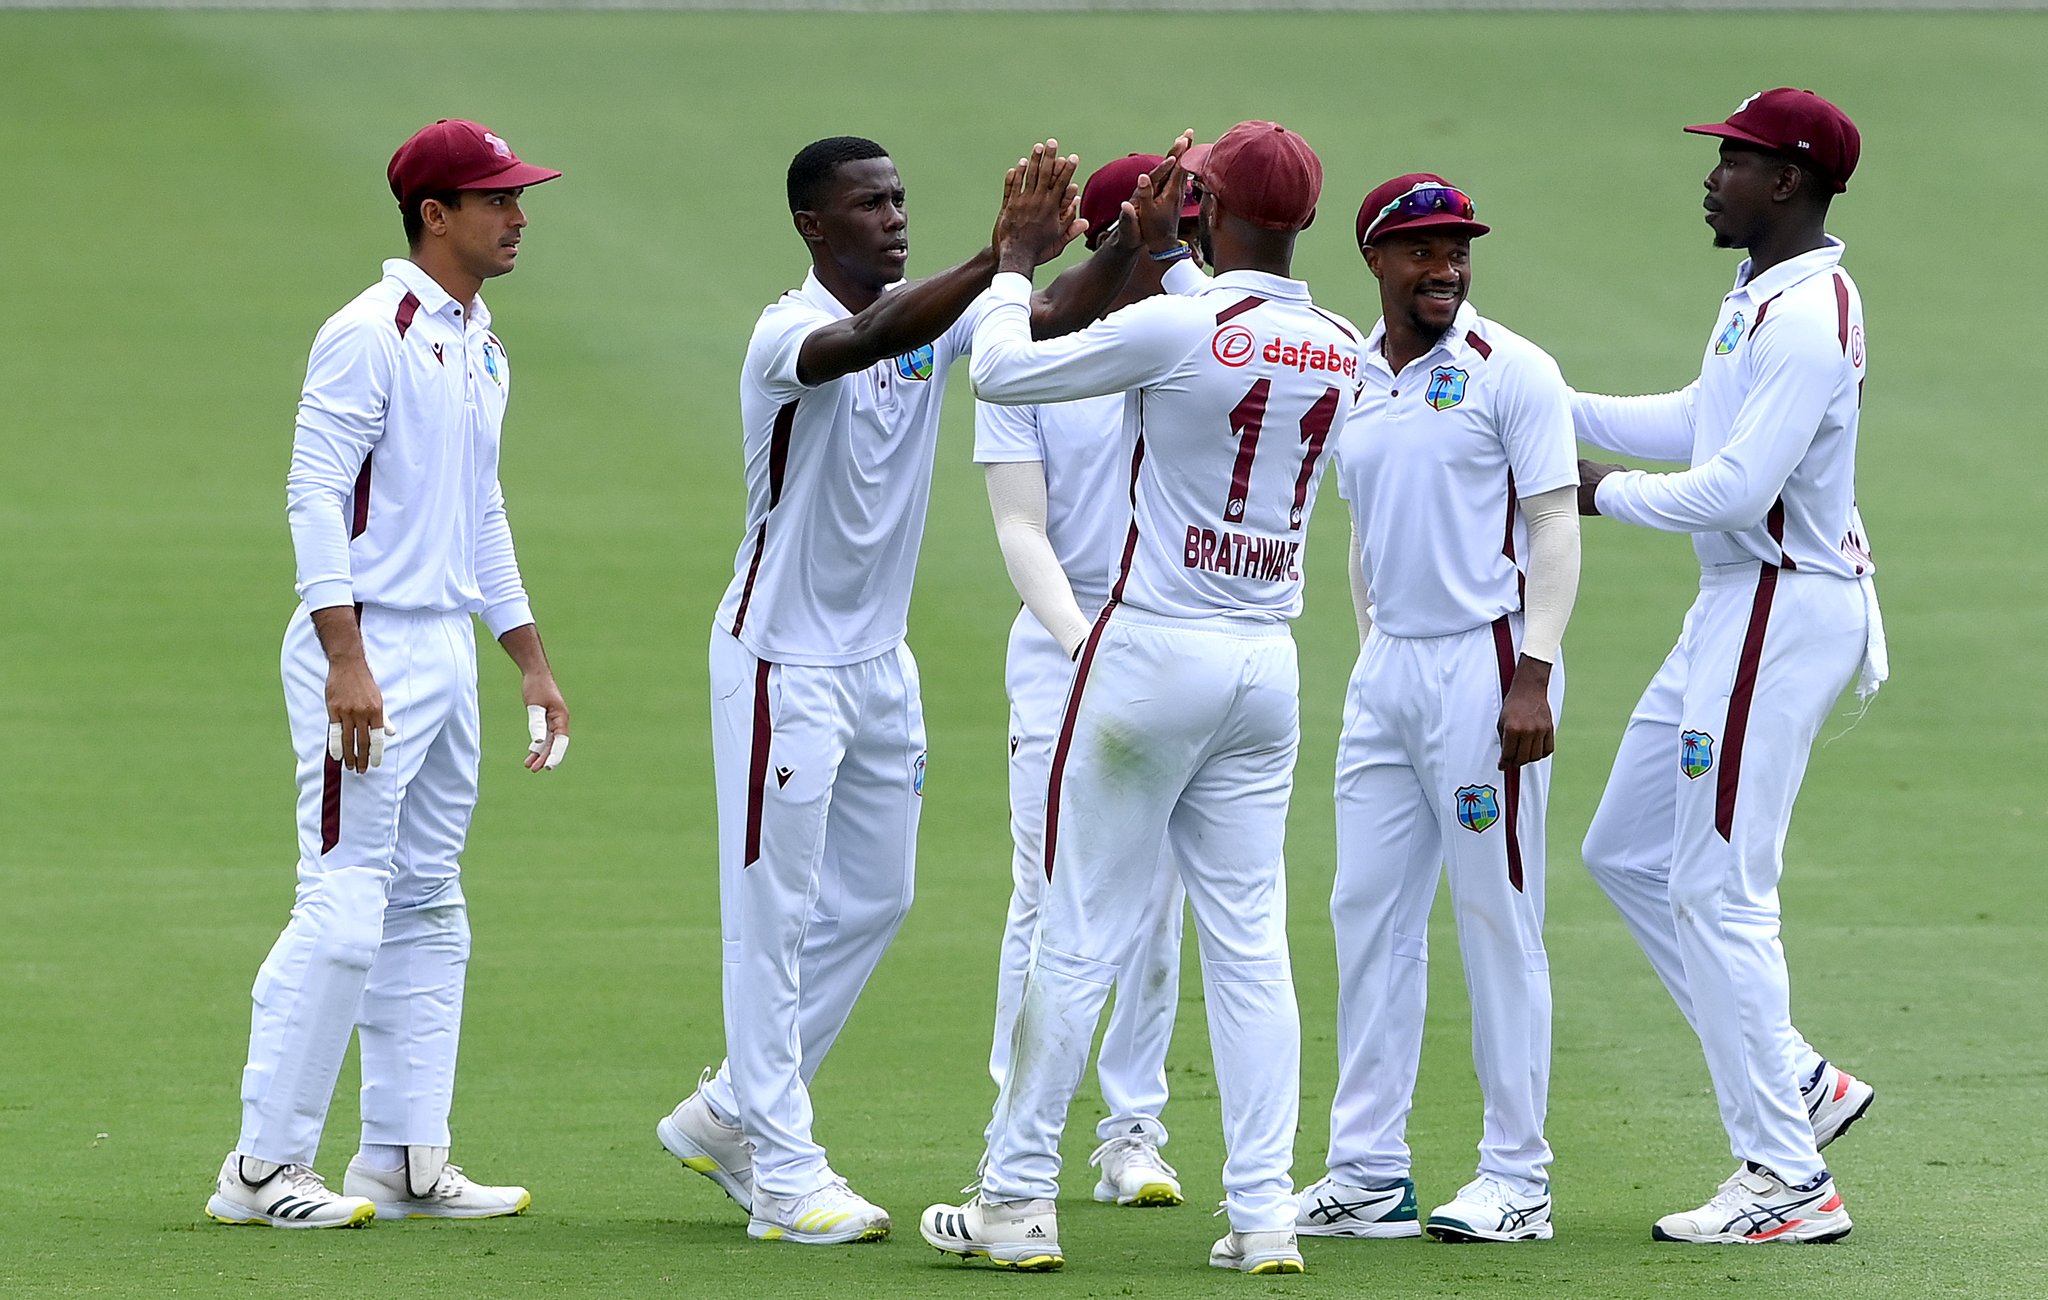 [WATCH] West Indies Make History with Stunning Test Victory Over Australia